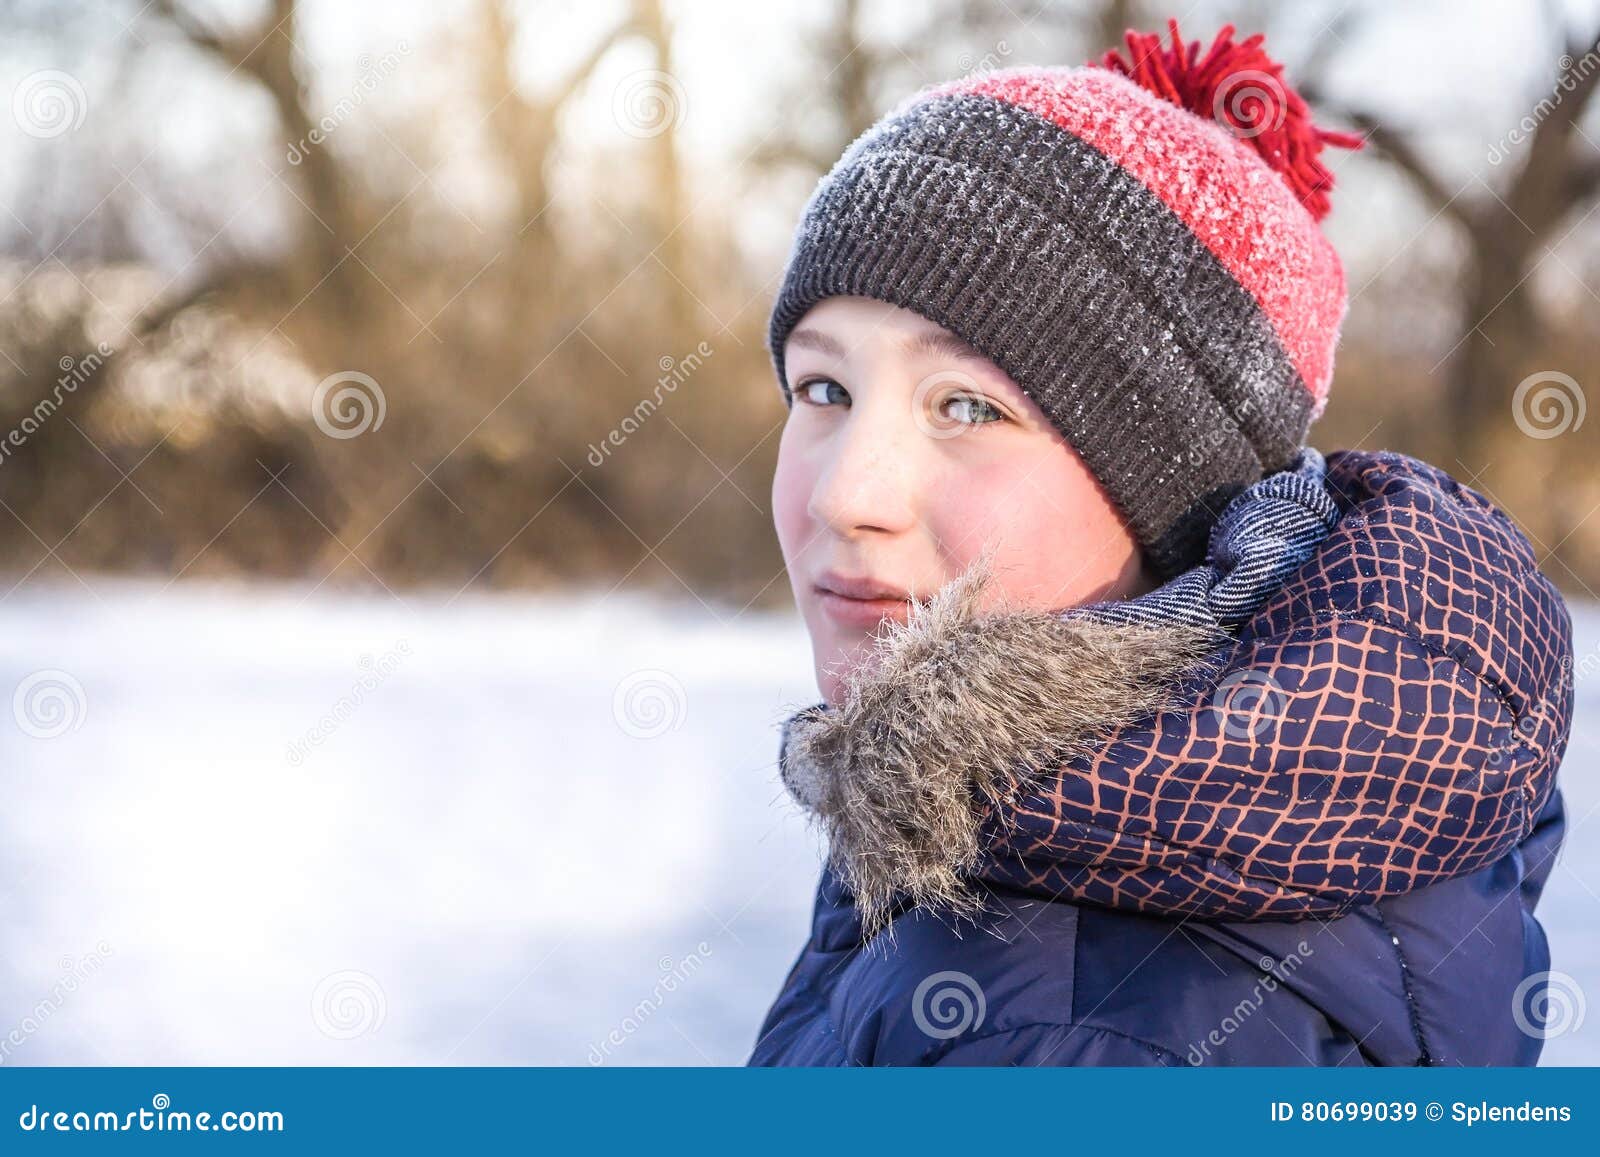 Child Turn Around and Looking at the Camera in Winter Park during ...